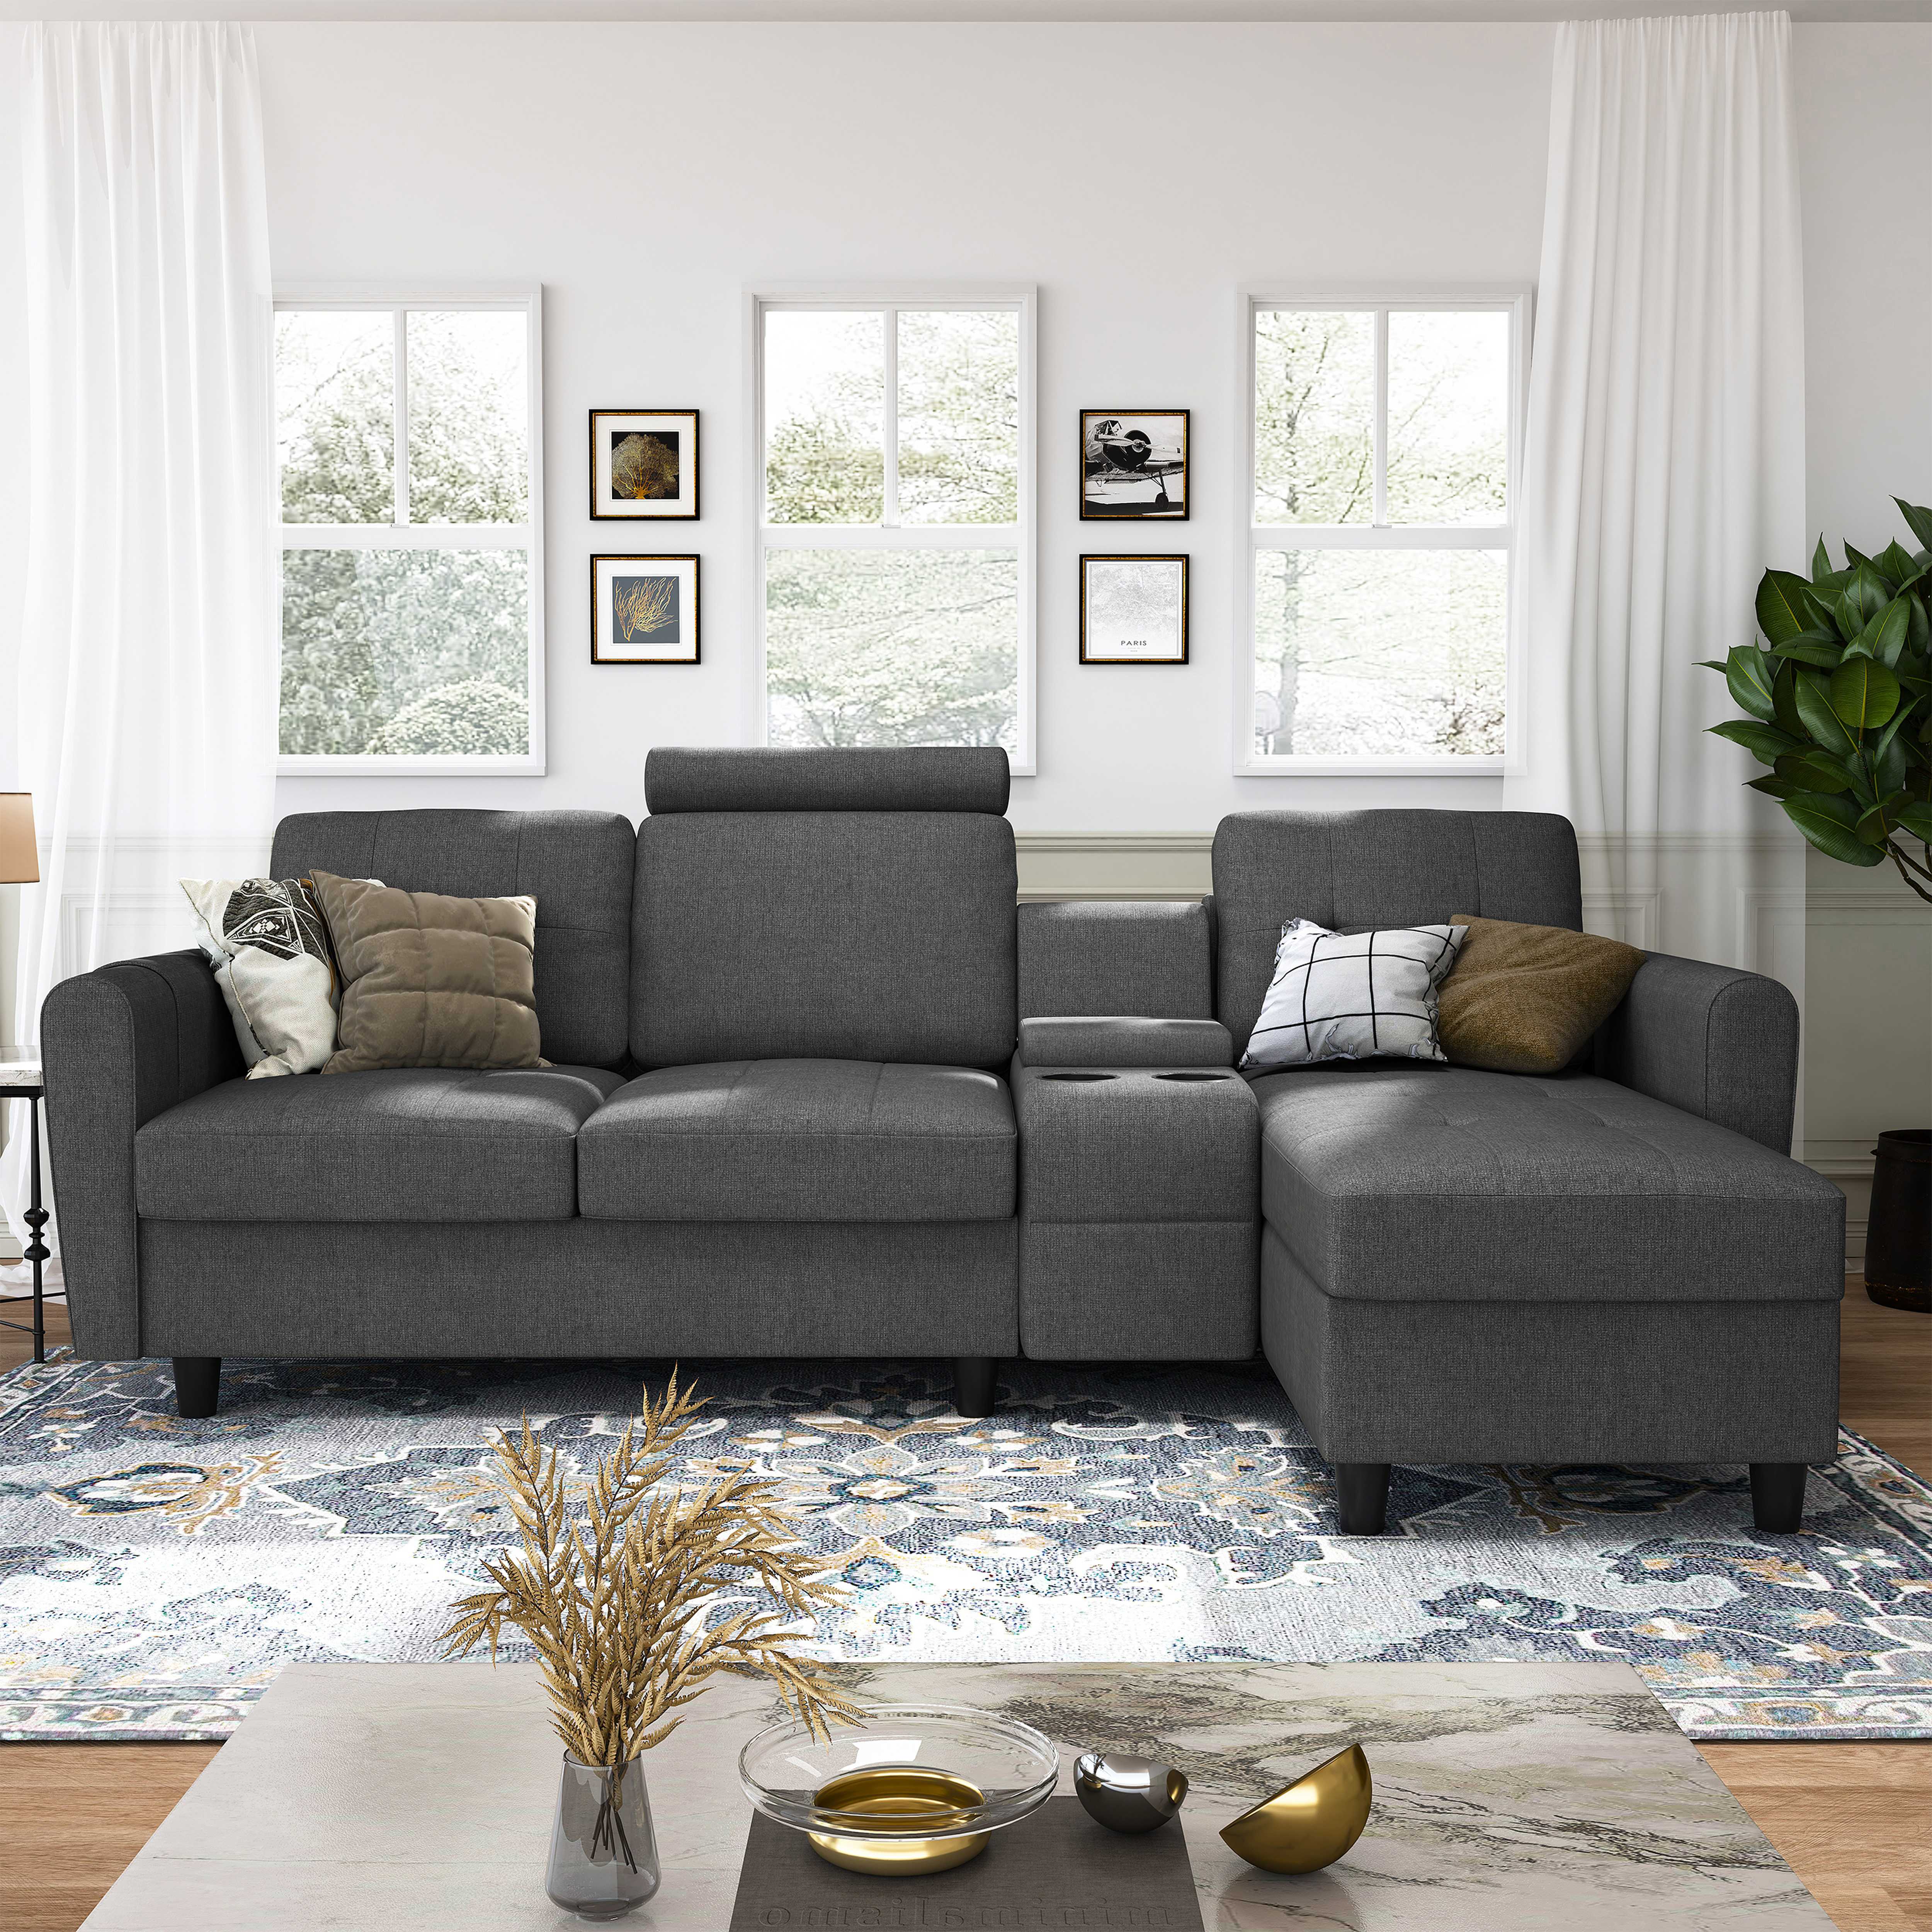 HONBAY Upholstered Fabric Sofa Couch Modern L-Shaped Reversible Sectional Sofa with Cup Holders & Storage Console for Living Room and Office, Dark Grey - image 5 of 10